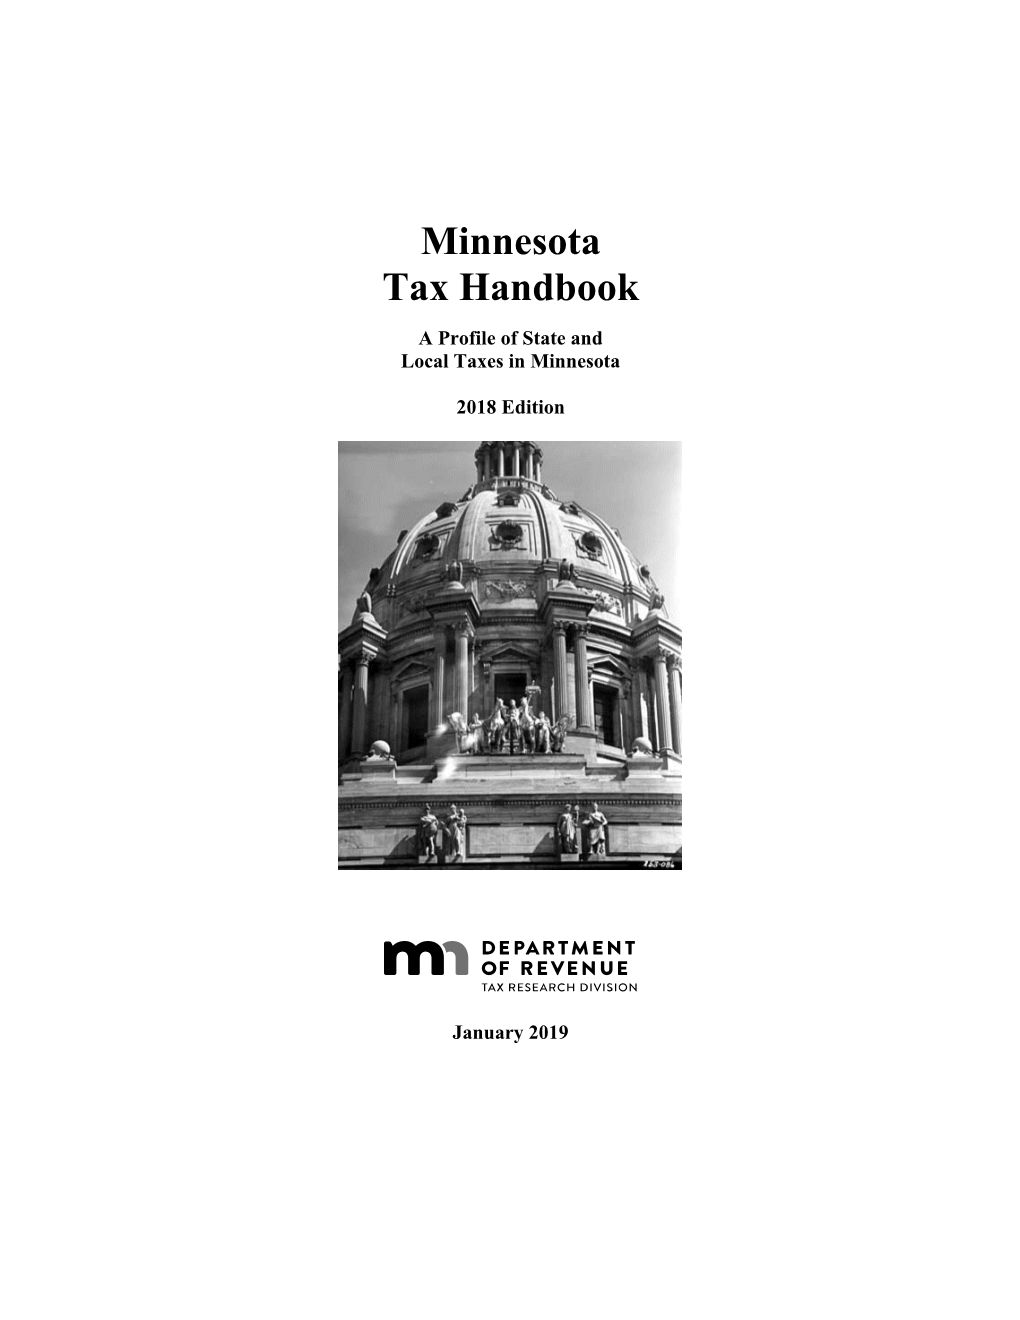 Minnesota Tax Handbook Provides General Information on Minnesota State and Local Taxes